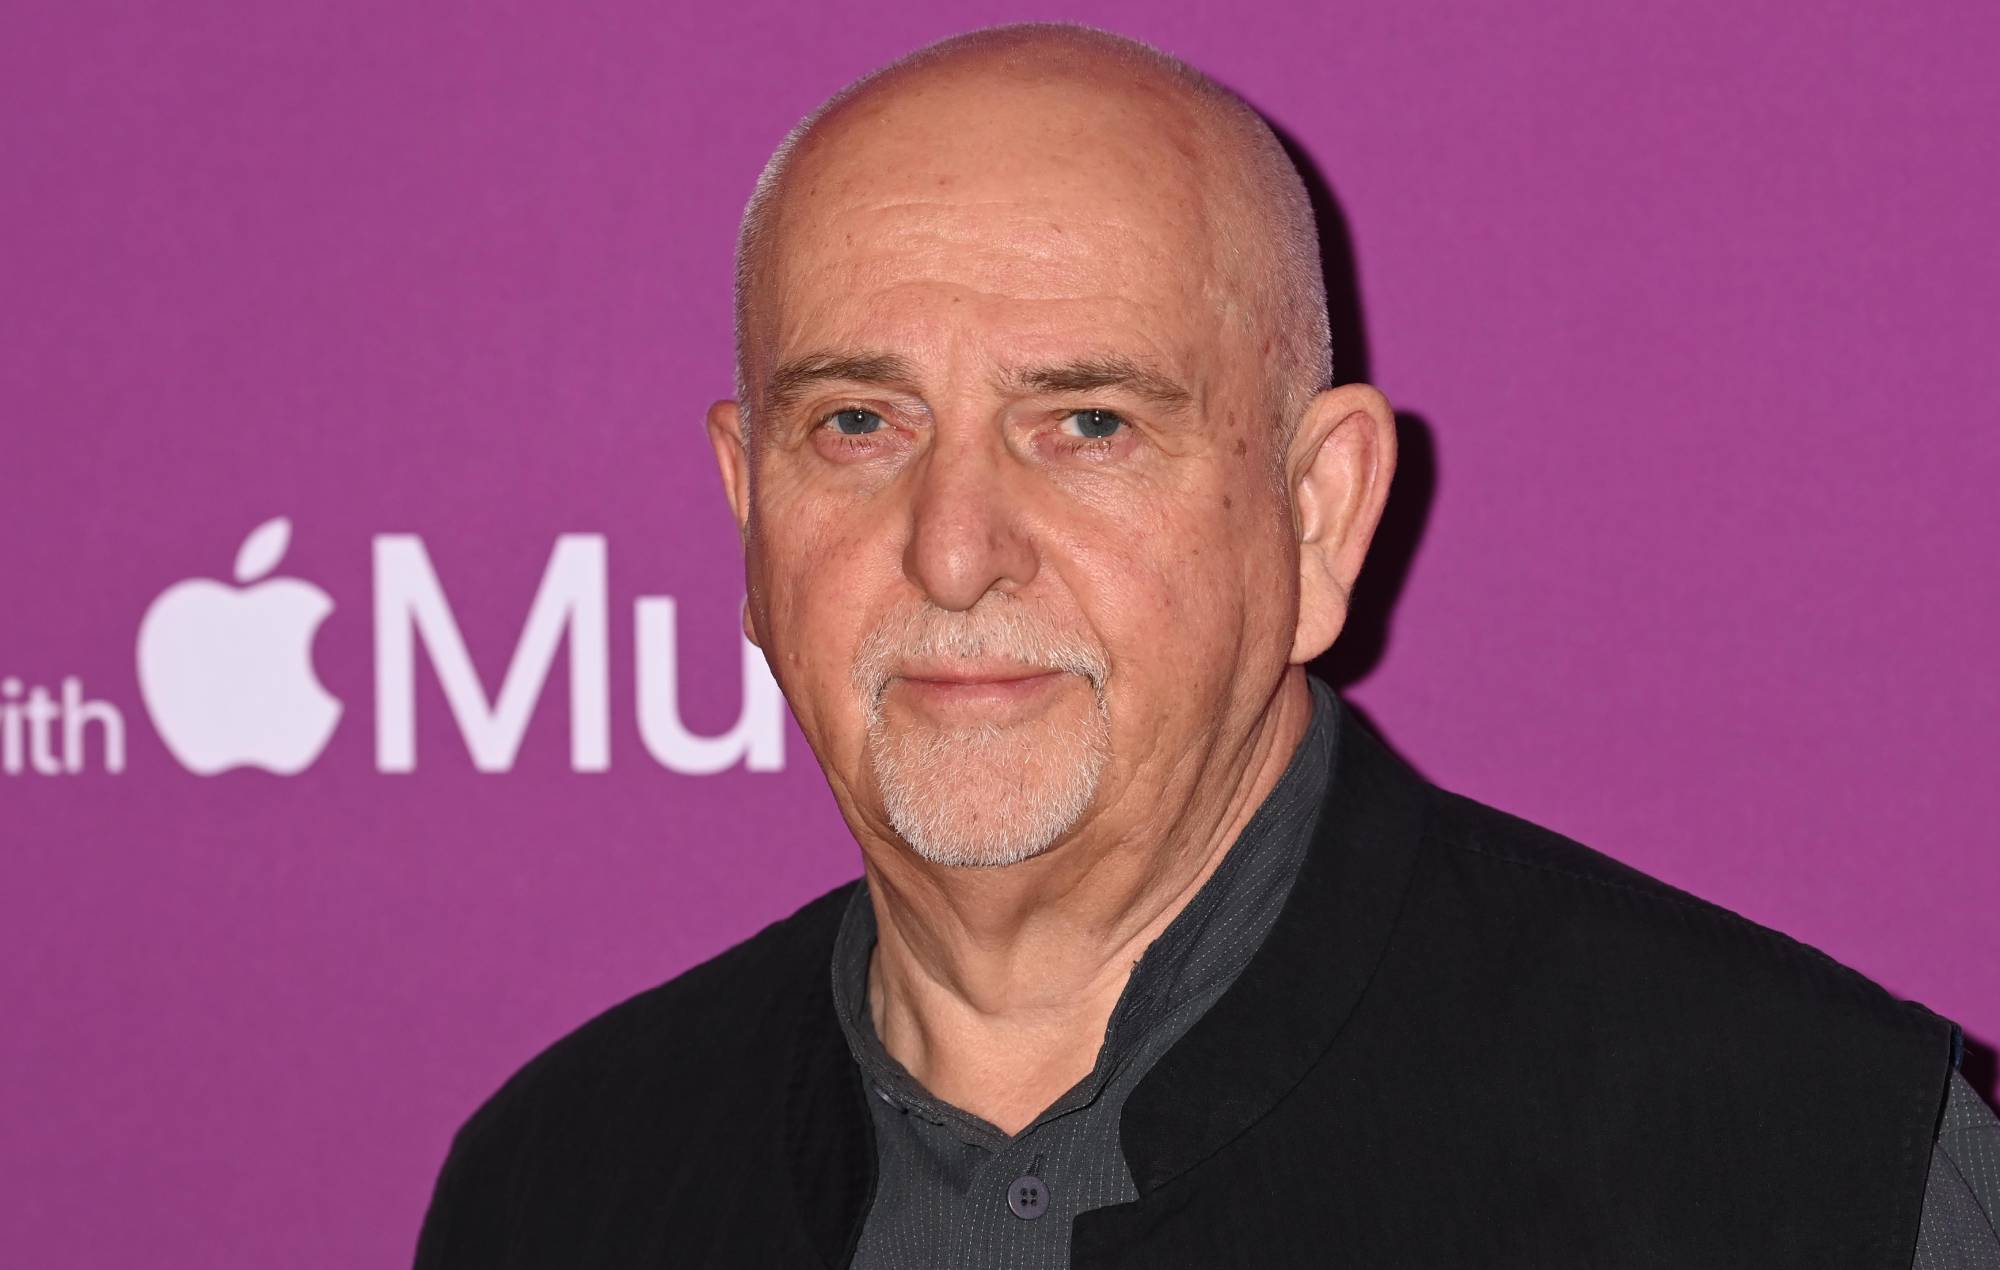 Peter Gabriel on working with Arcade Fire and making touring greener